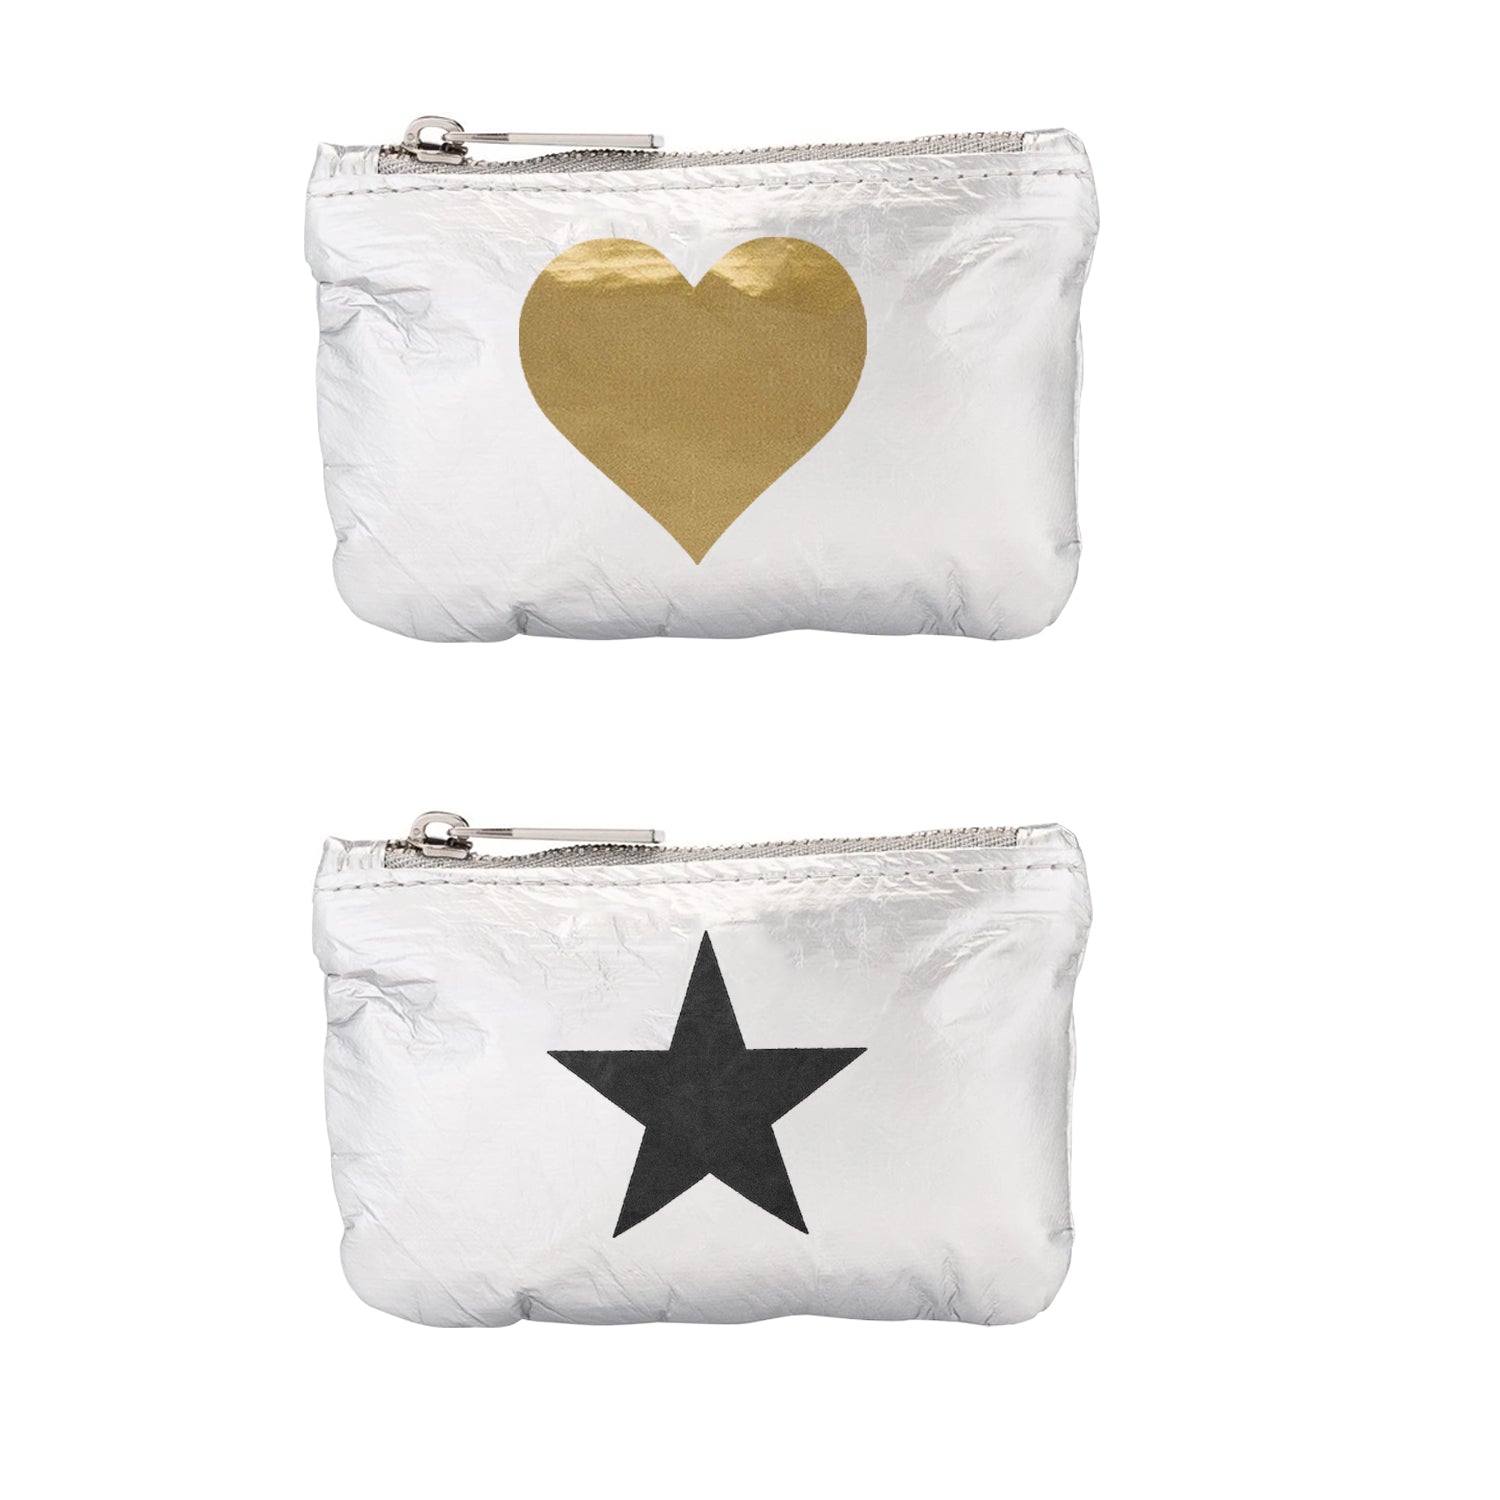 Set of Two Gift Card Holder Packs - Silver with Gold Heart and Black Star